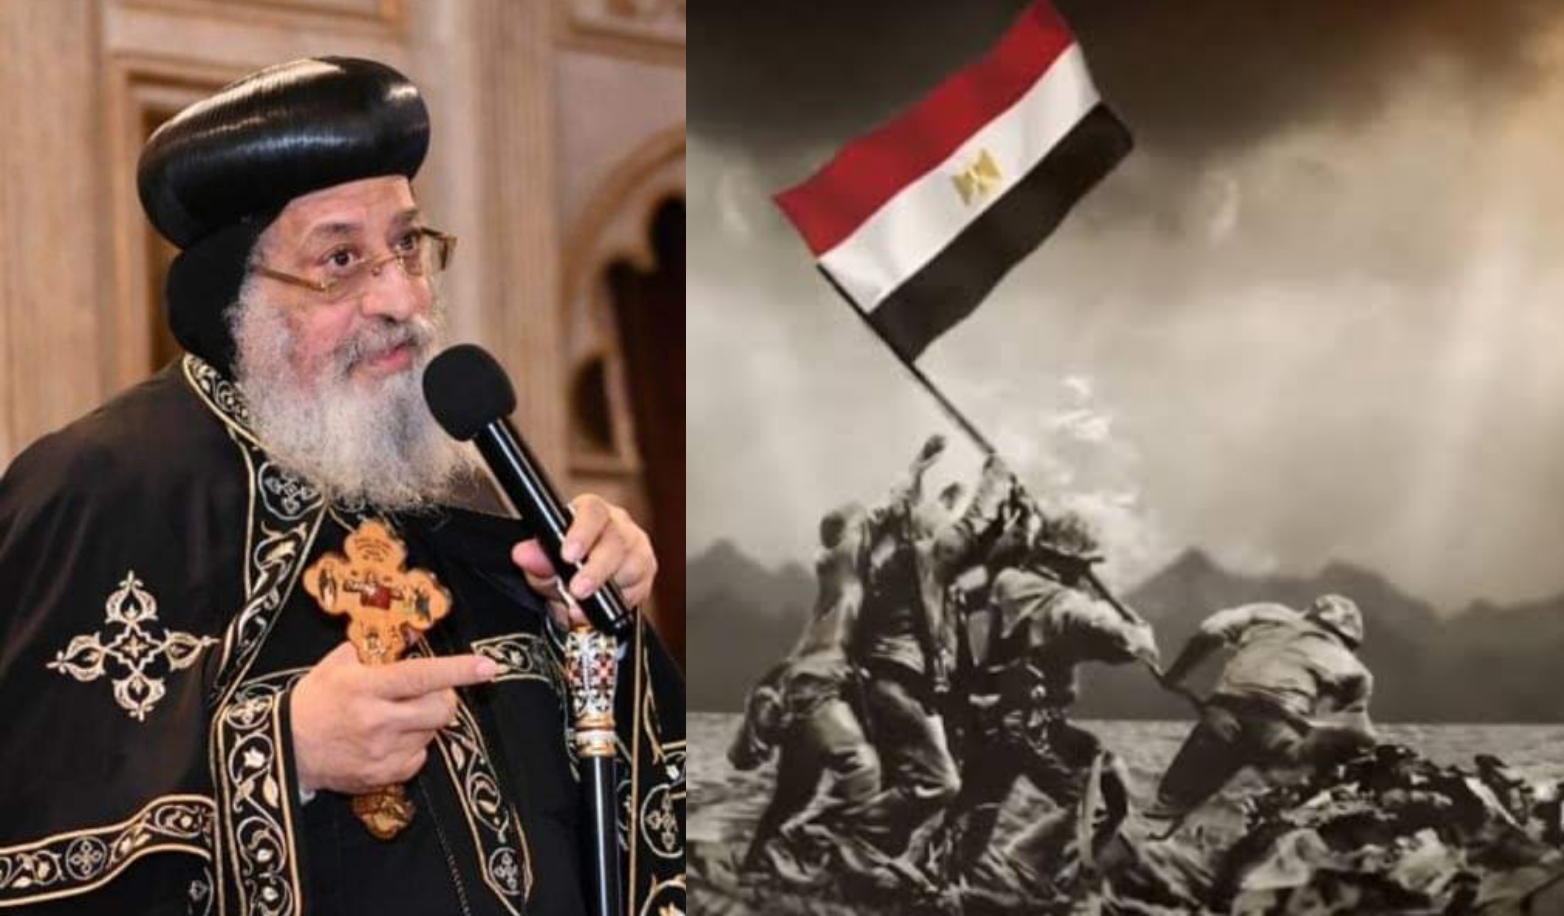 The Coptic Orthodox Church congratulates the Egyptian people on the occasion of the Ninth Anniversary of June 30th Revolution